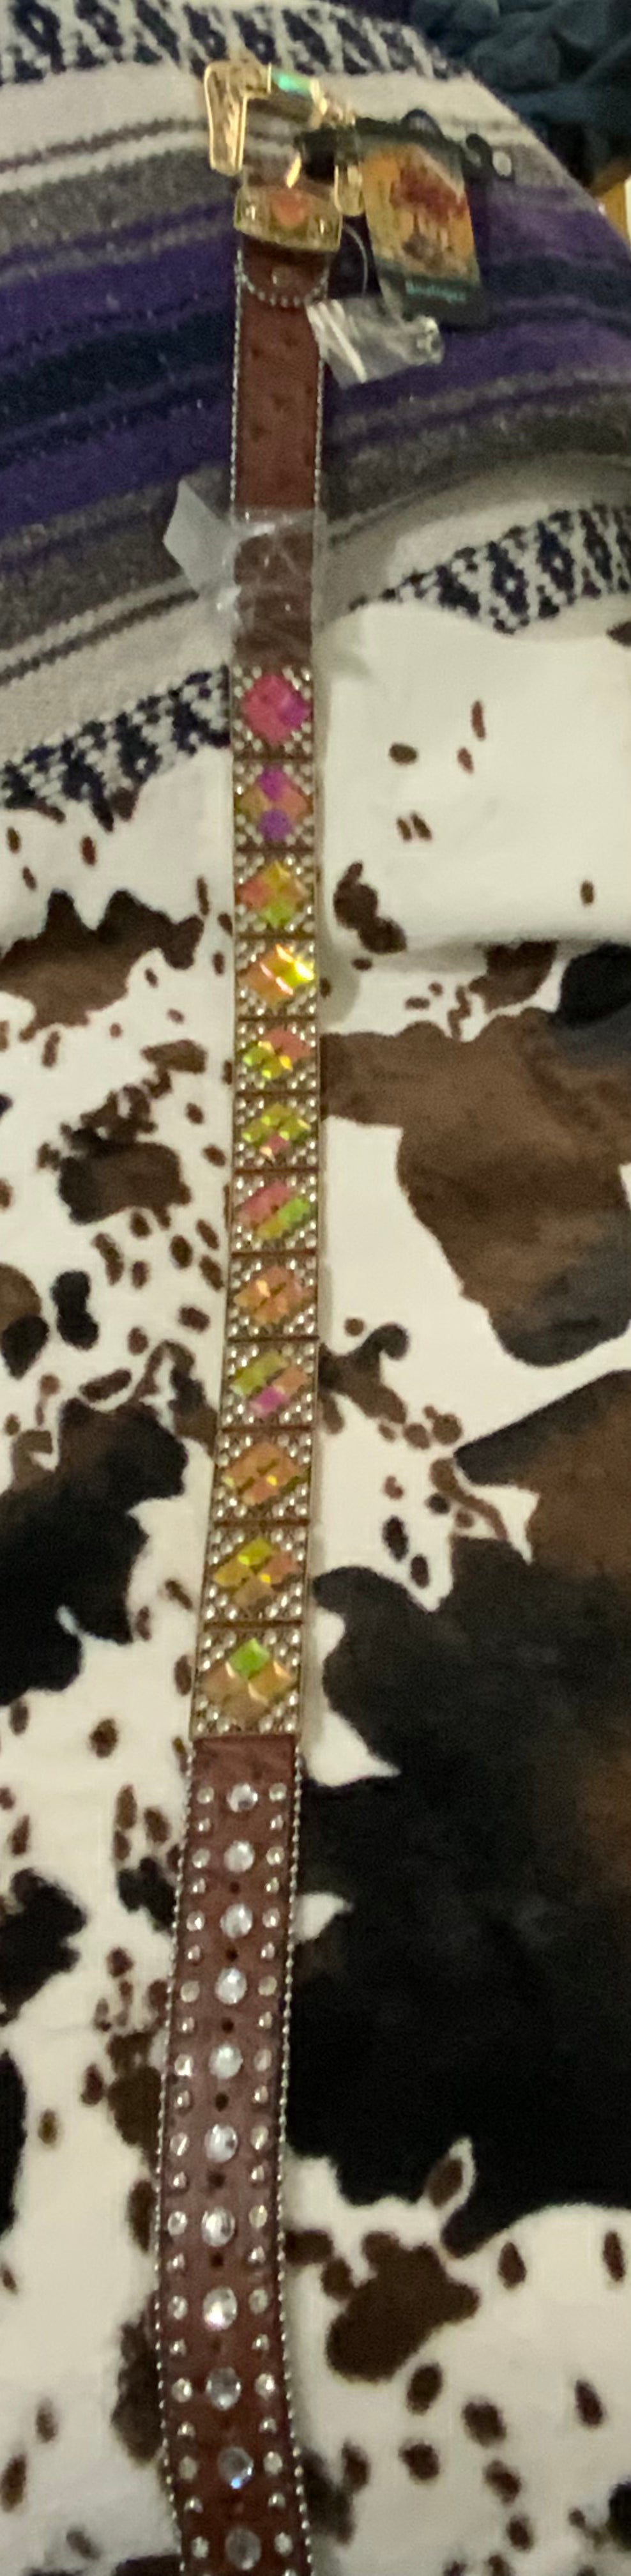 Full View-Genuine Leather Blingy Belt with Rhinestones